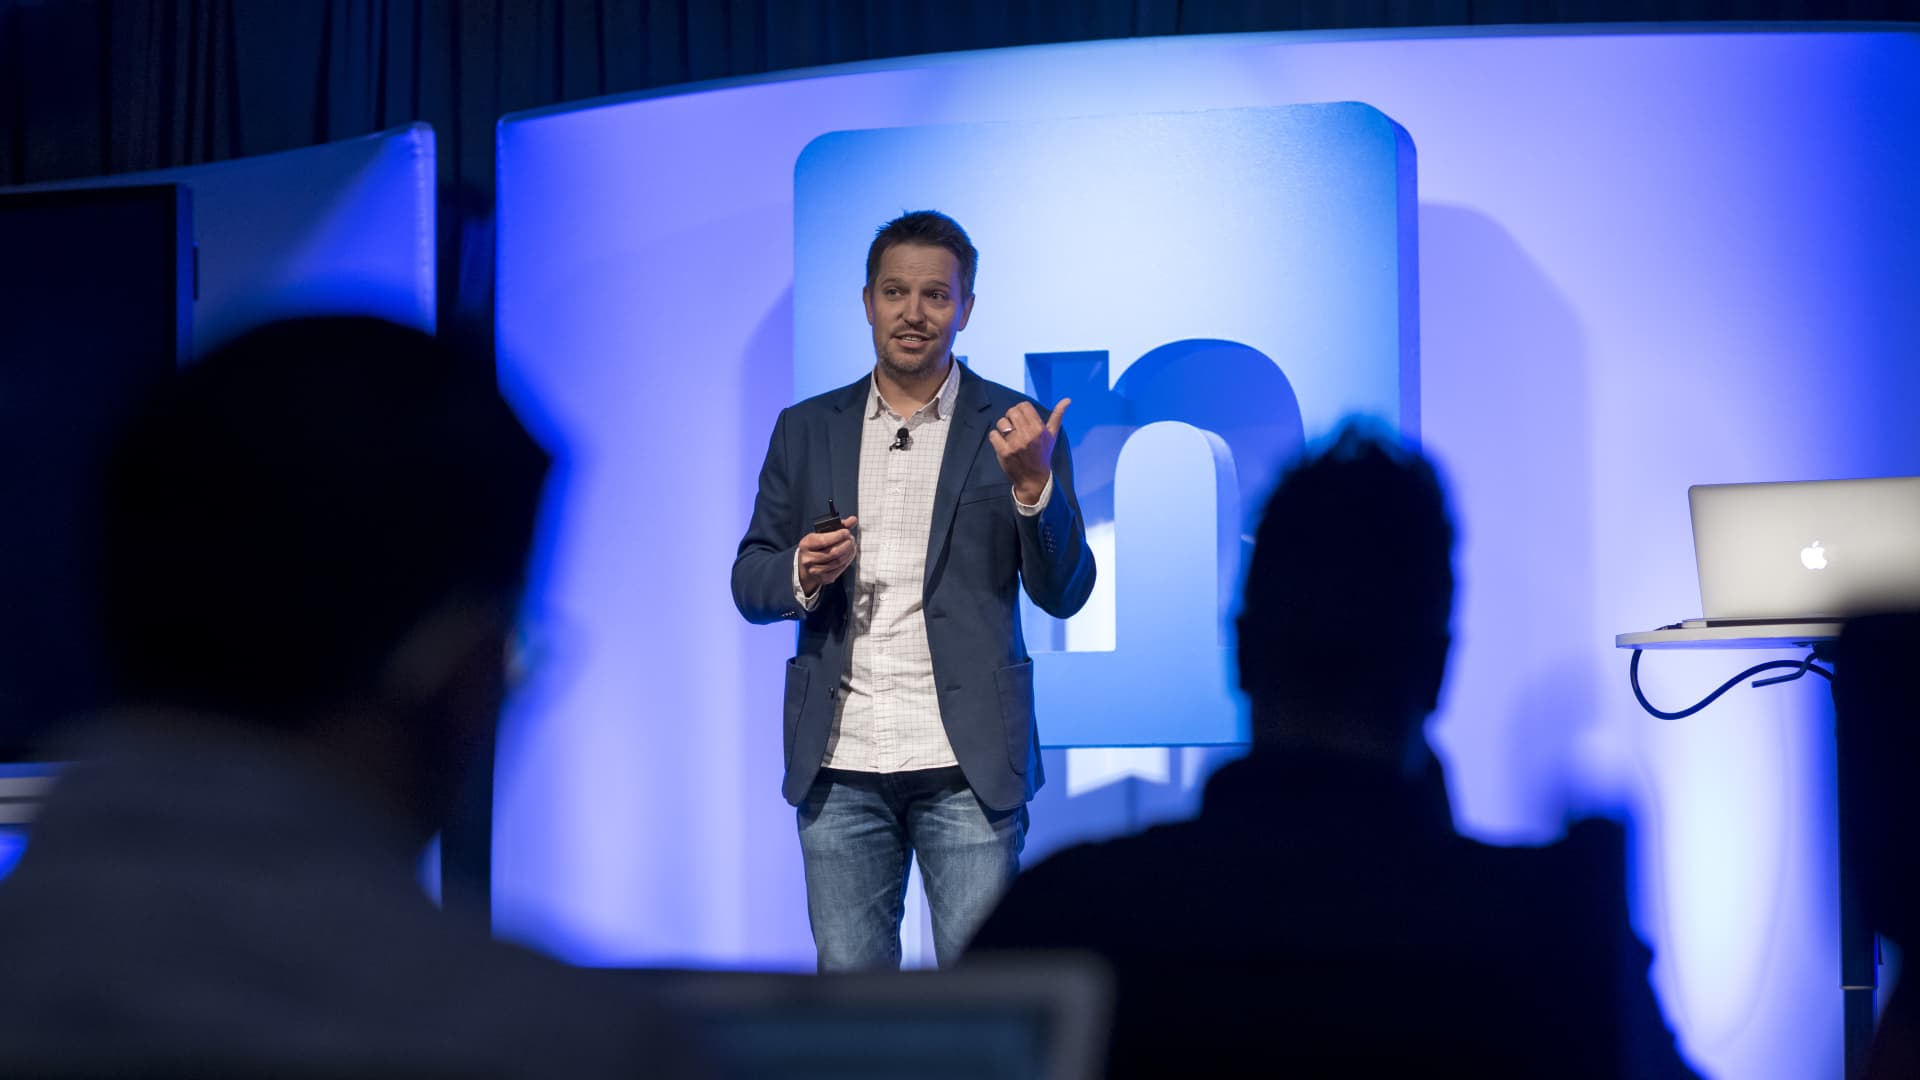 LinkedIn expands Thought Leader ads, eyeing TikTok and Instagram [Video]